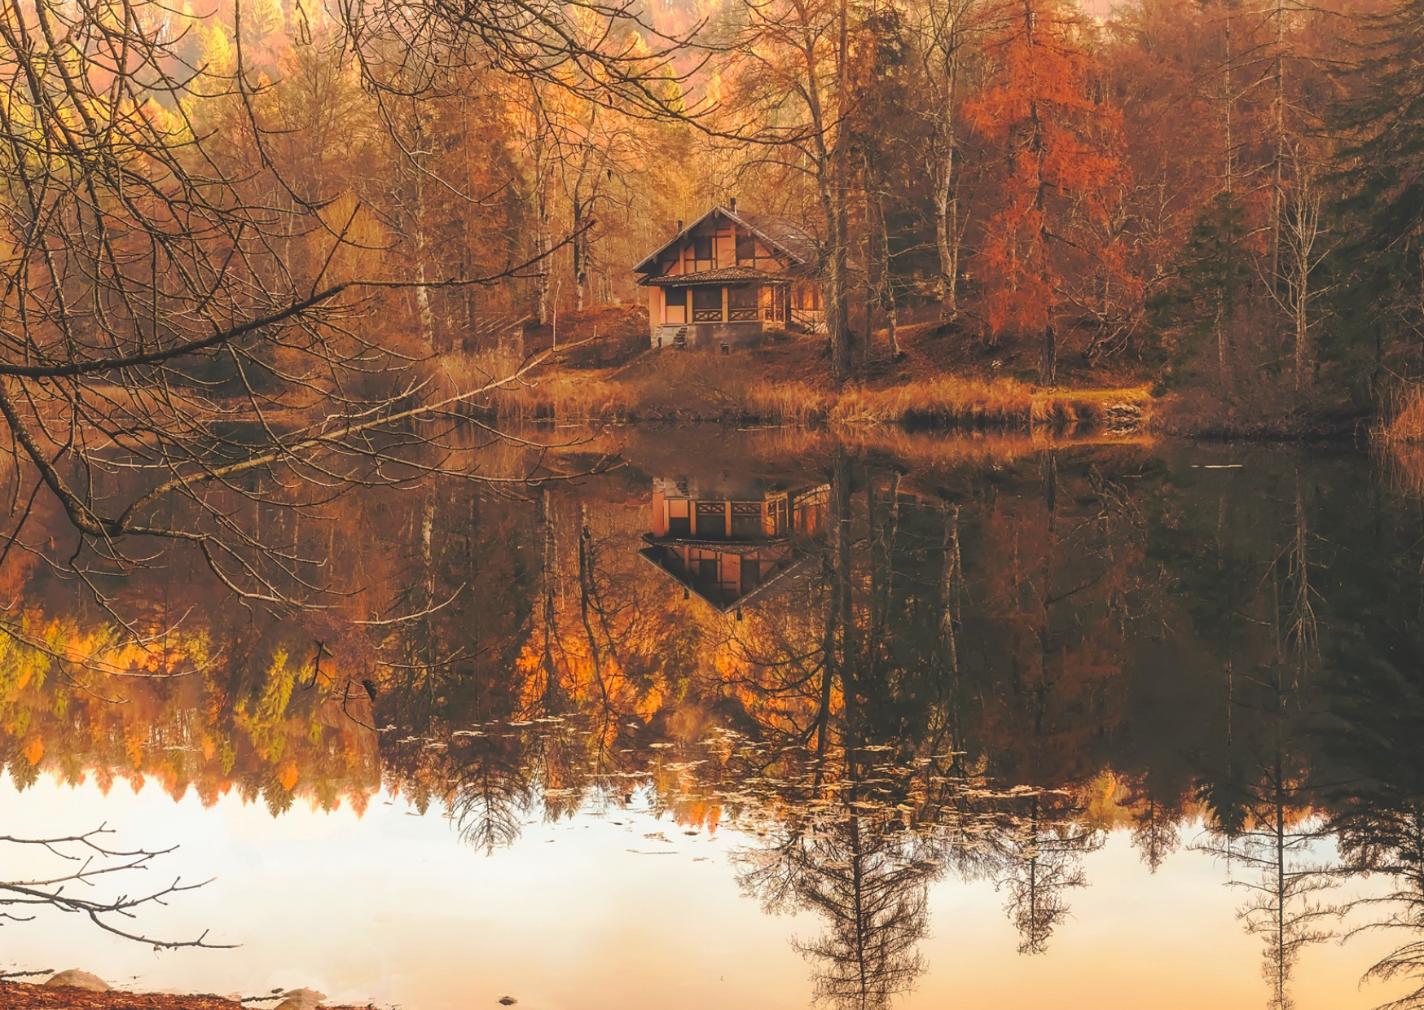 Vacation Rentals in Branson, MO: Your Guide to Experiencing Fall Foliage